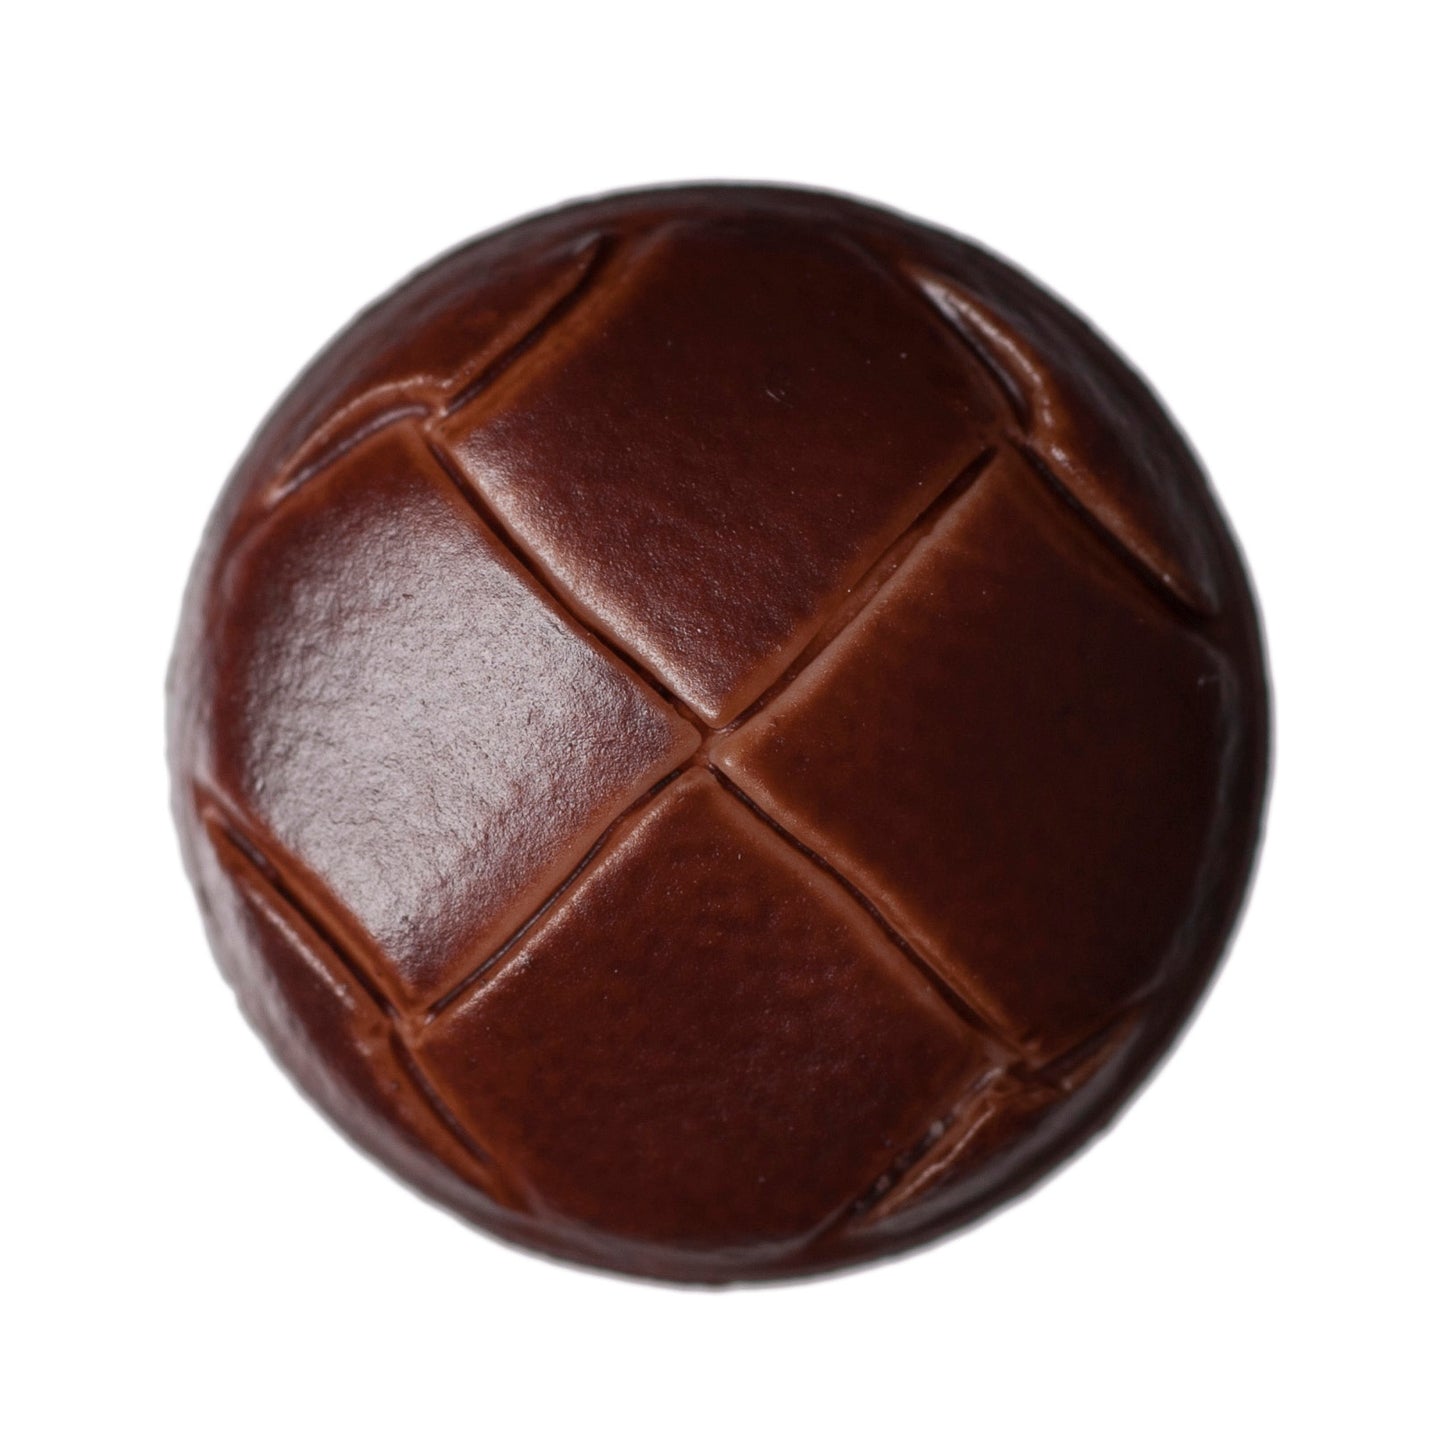 Imitation Leather Shank Button - 15mm - Russet